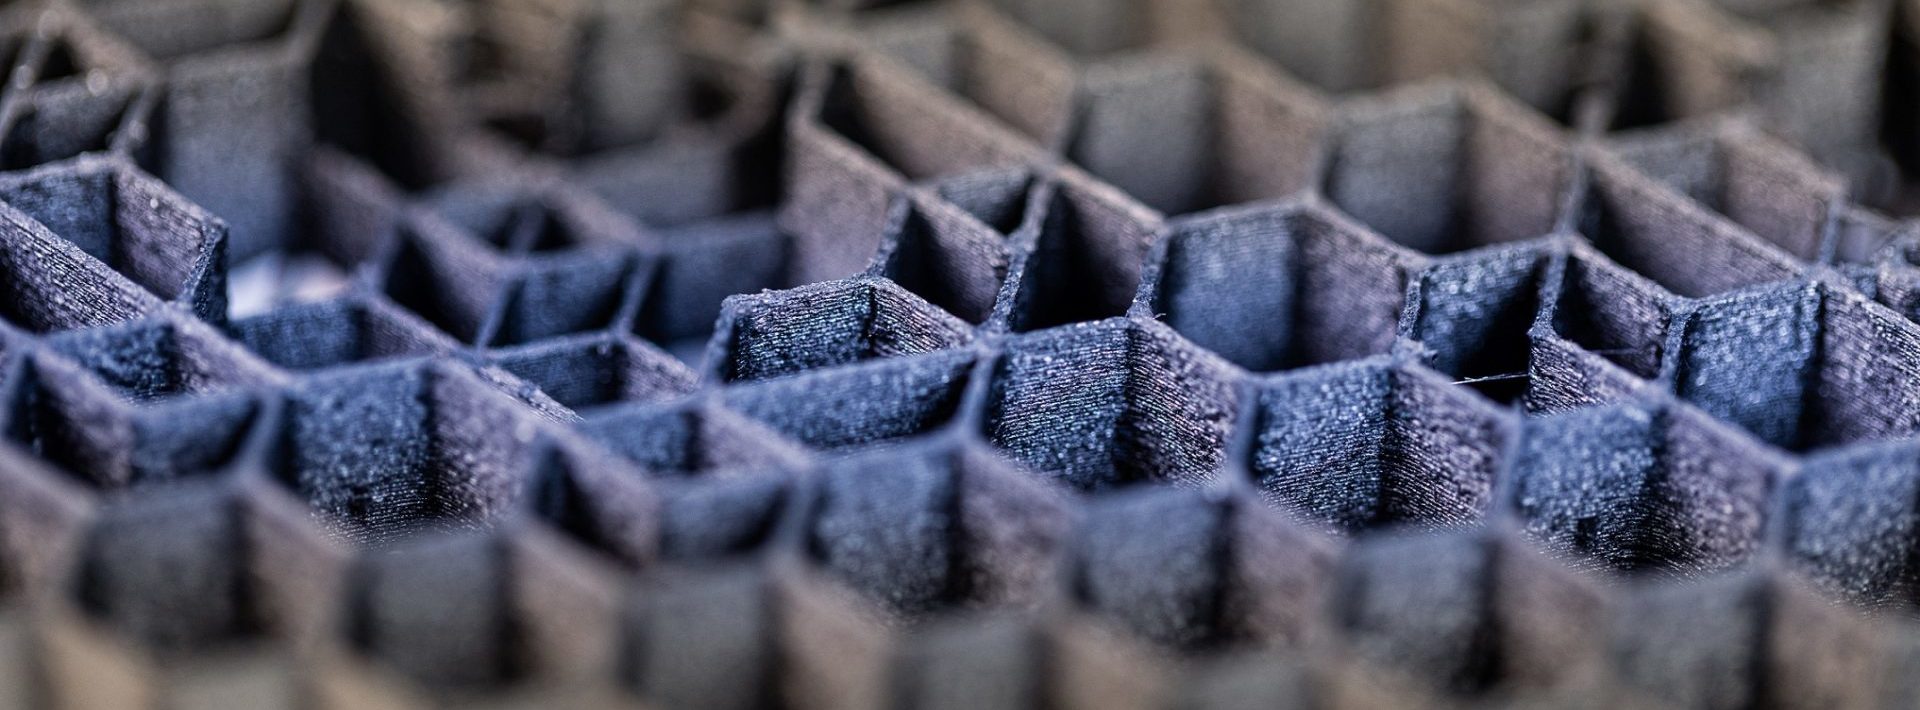 Additive manufacturing - commonly known as 3D printing